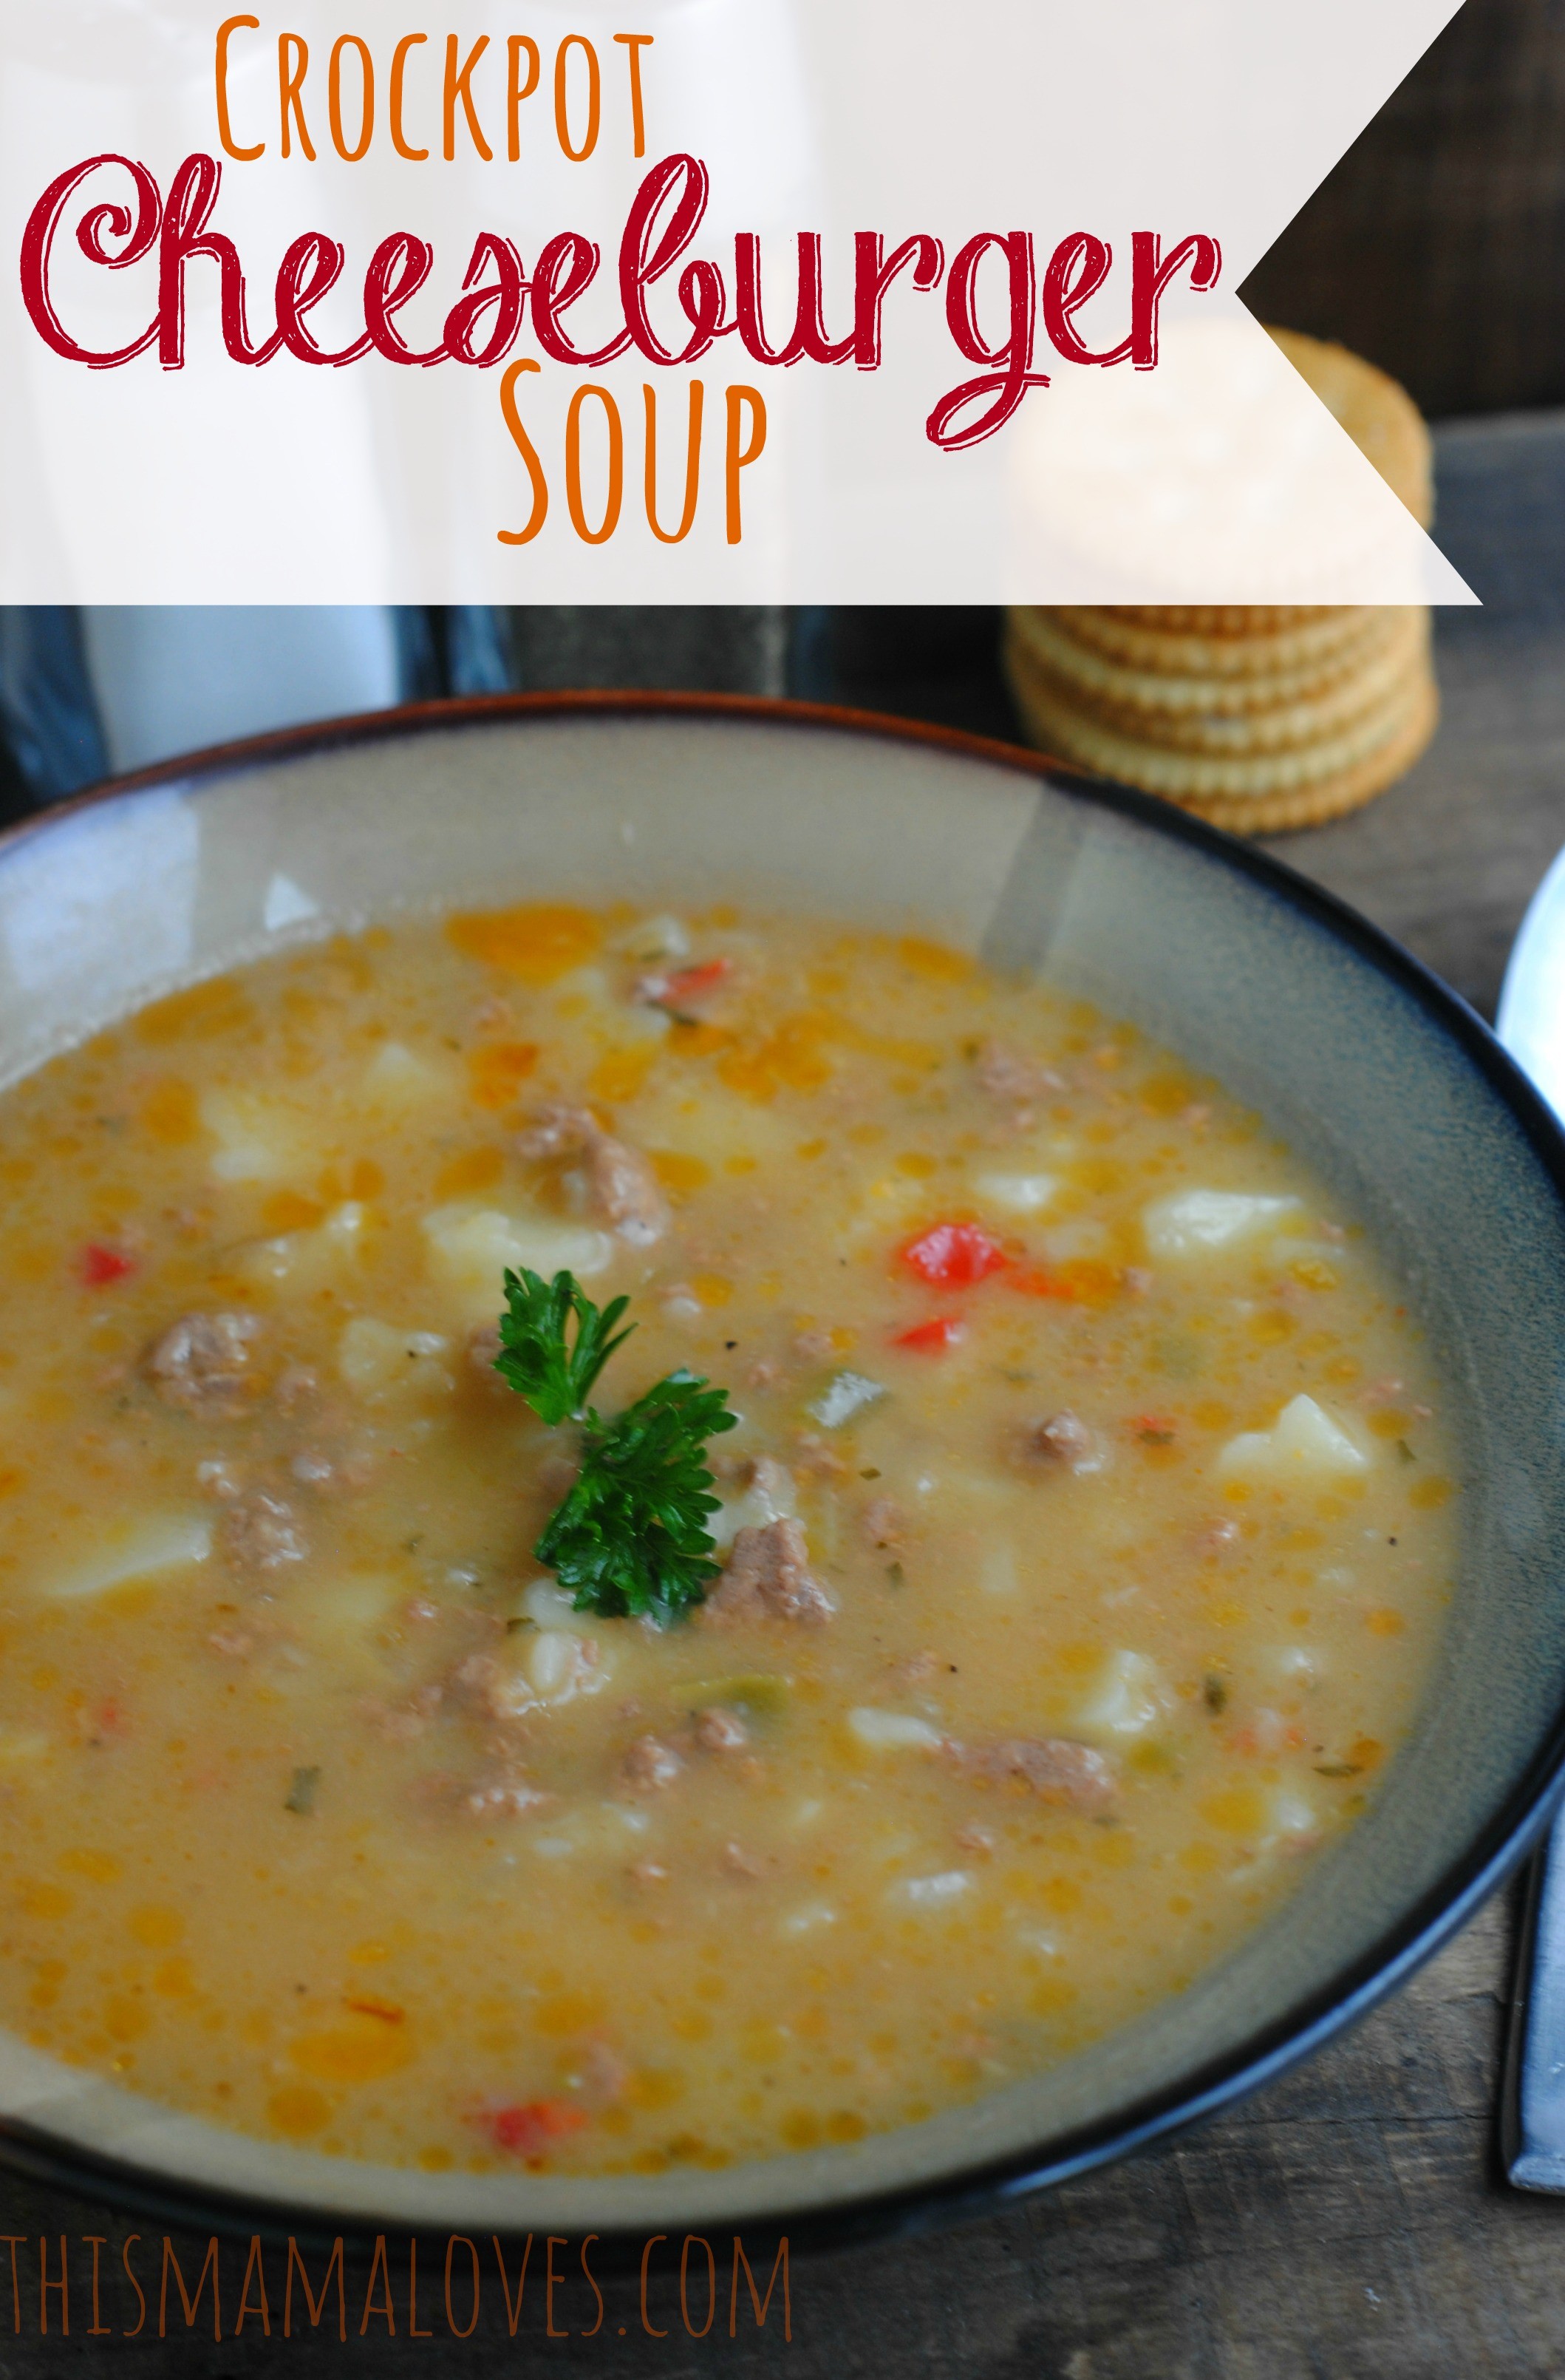 Crockpot Cheeseburger Soup {Prepped in Minutes!}